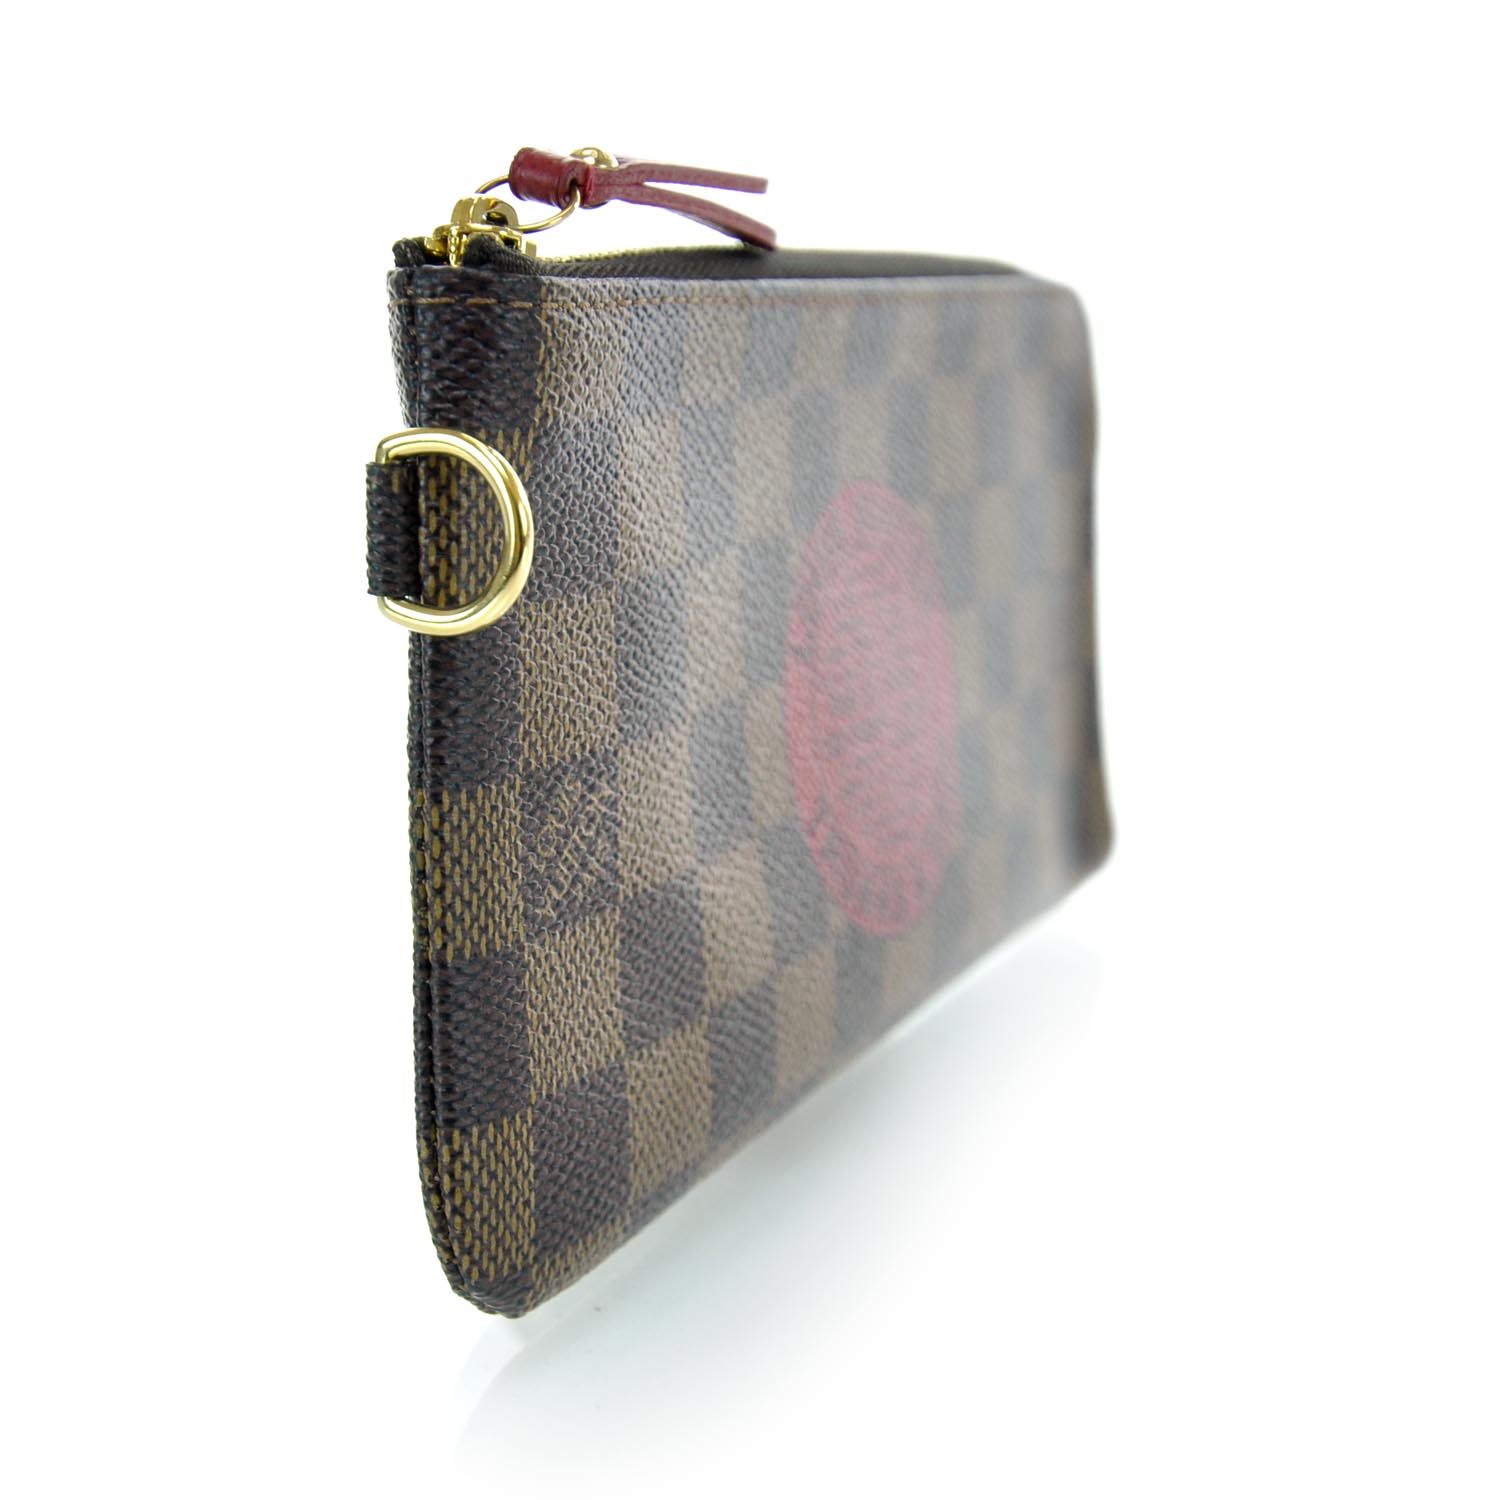 LOUIS VUITTON Monogram Complice Trunks and Bags Wallet 29389